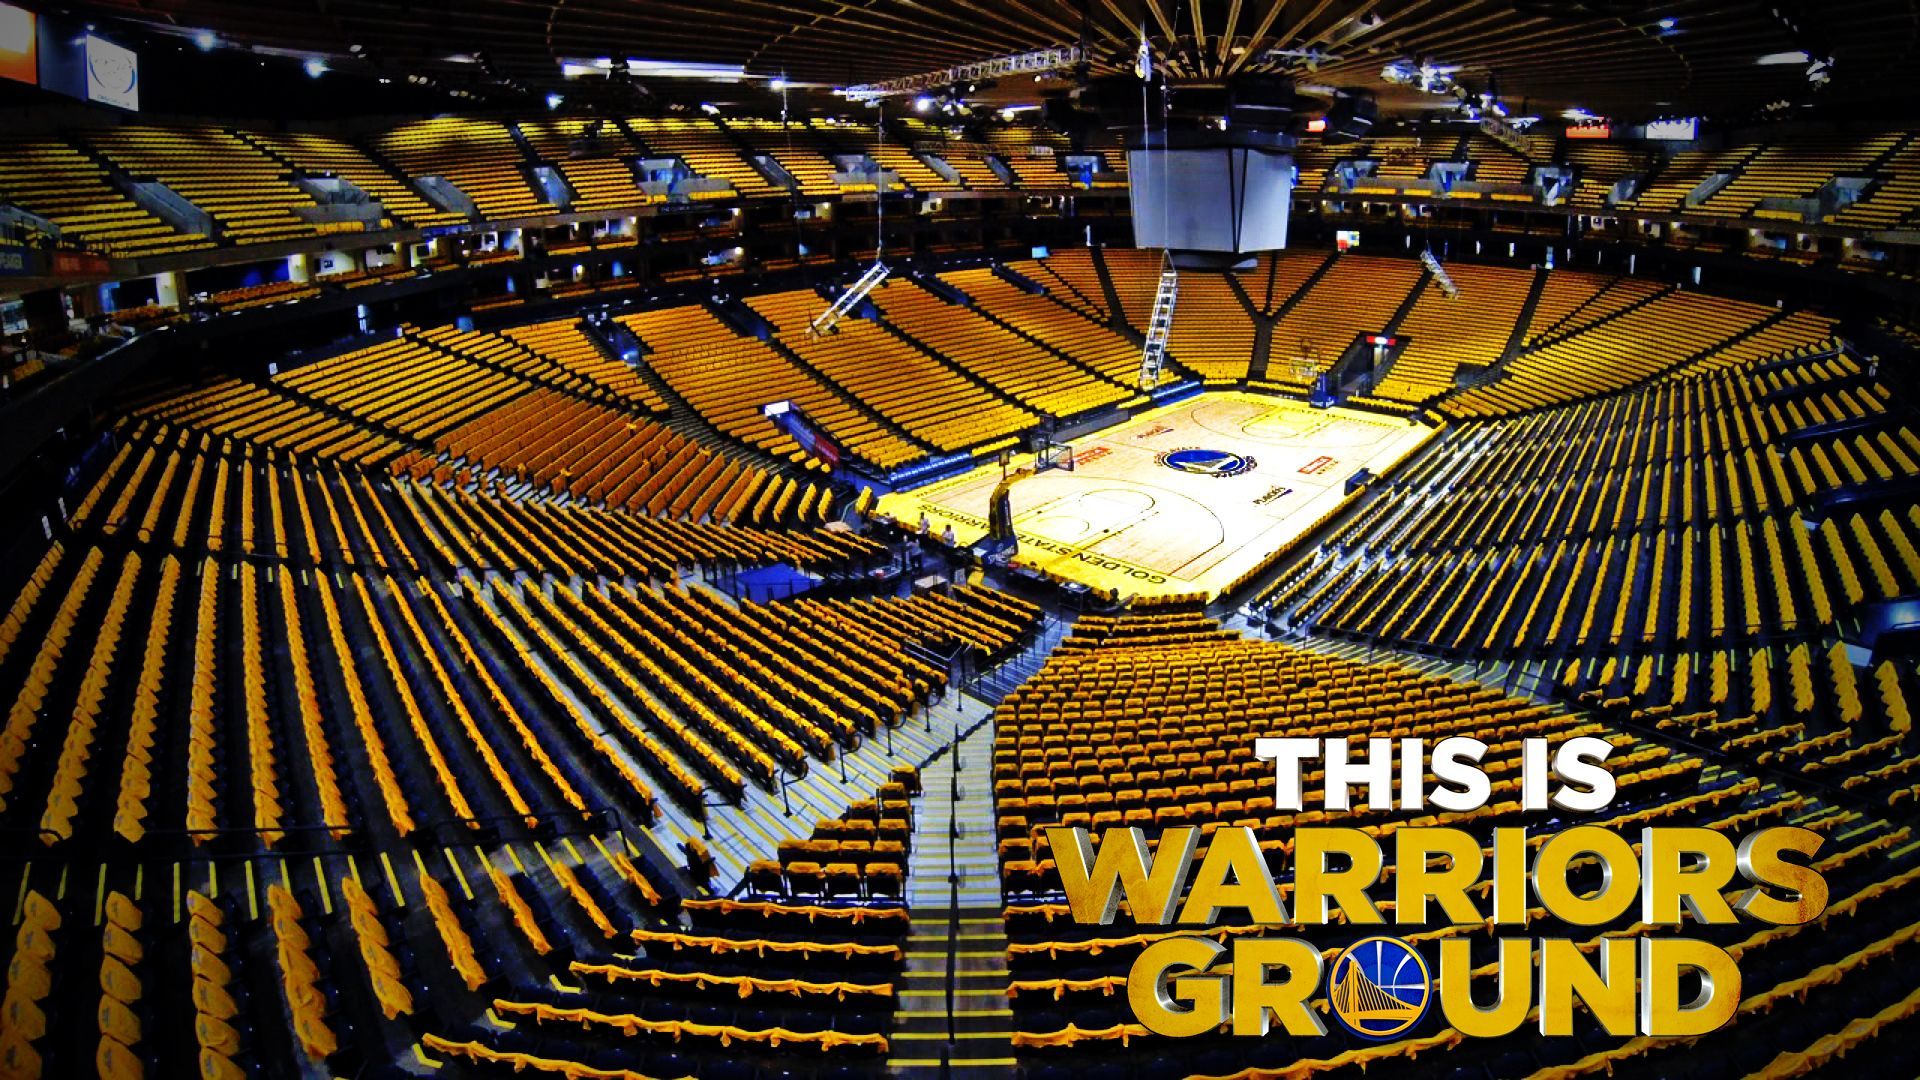 Golden State Warriors Wallpapers | Wallpapers, Backgrounds, Images ...